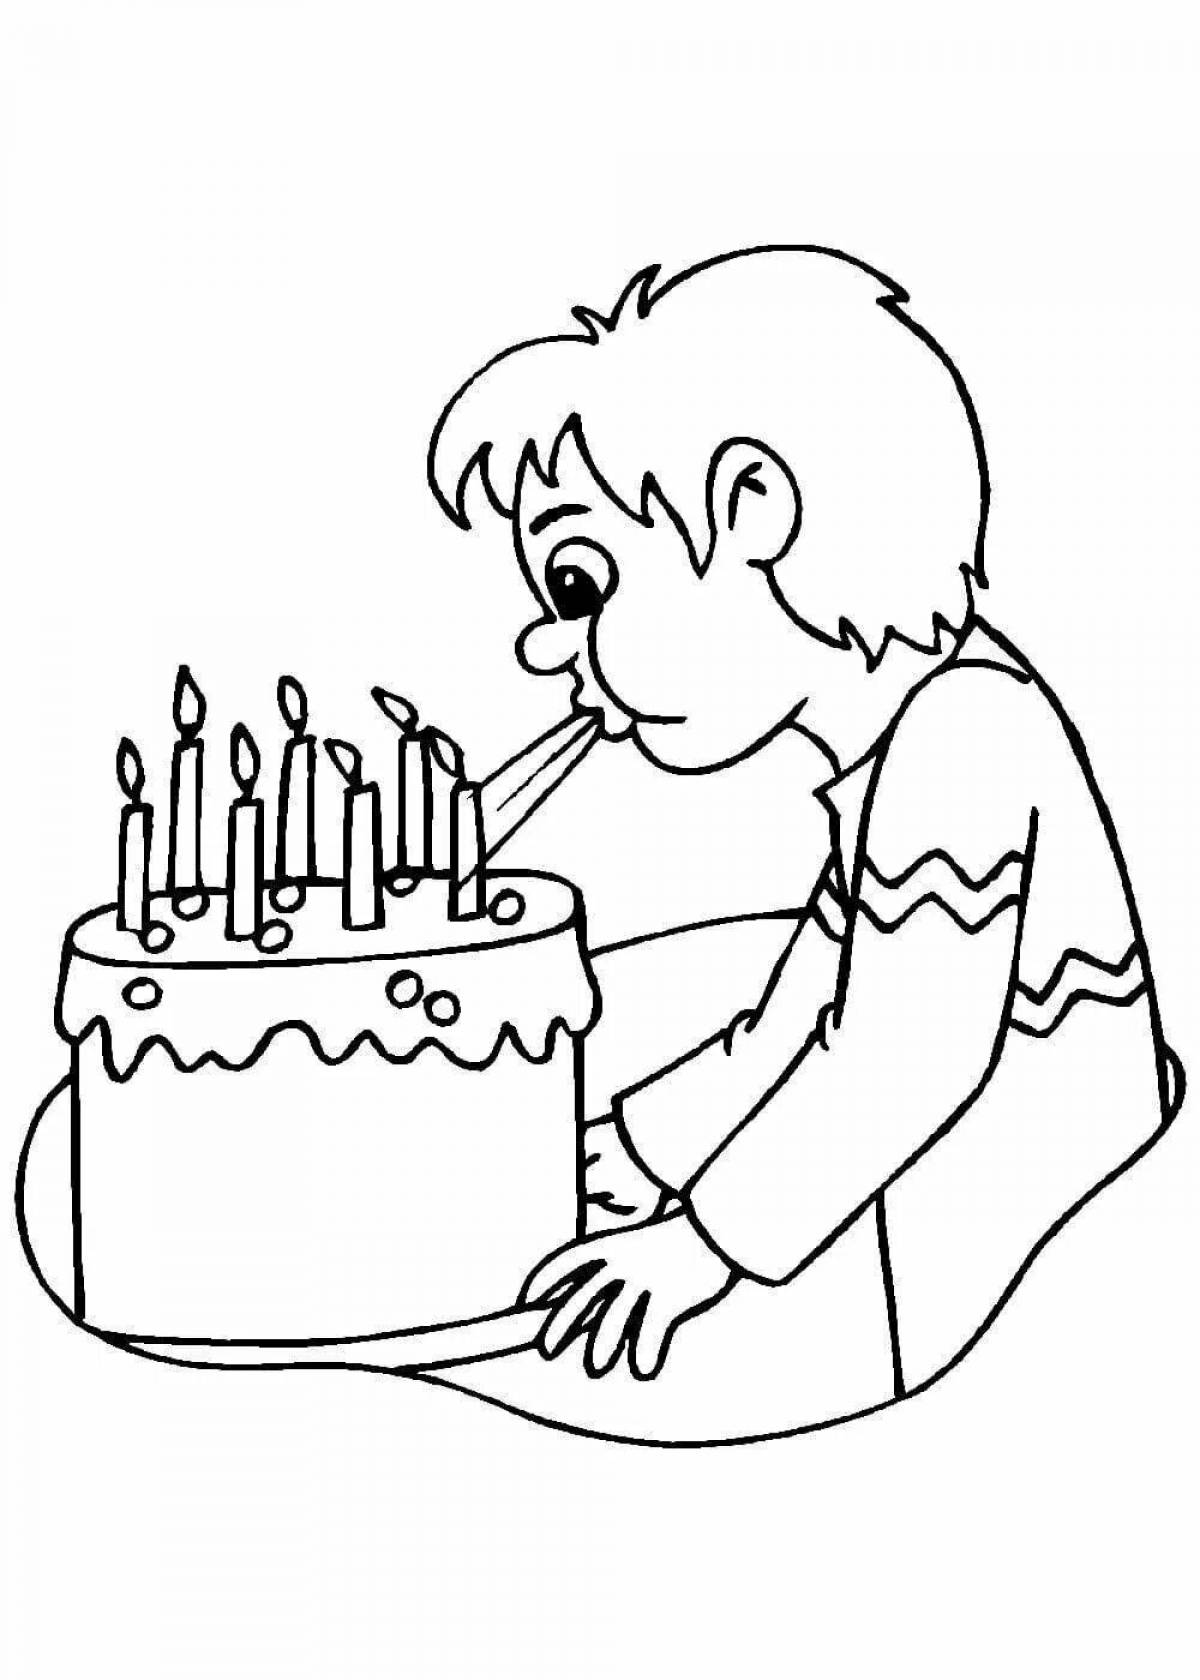 Large happy birthday coloring book for kids